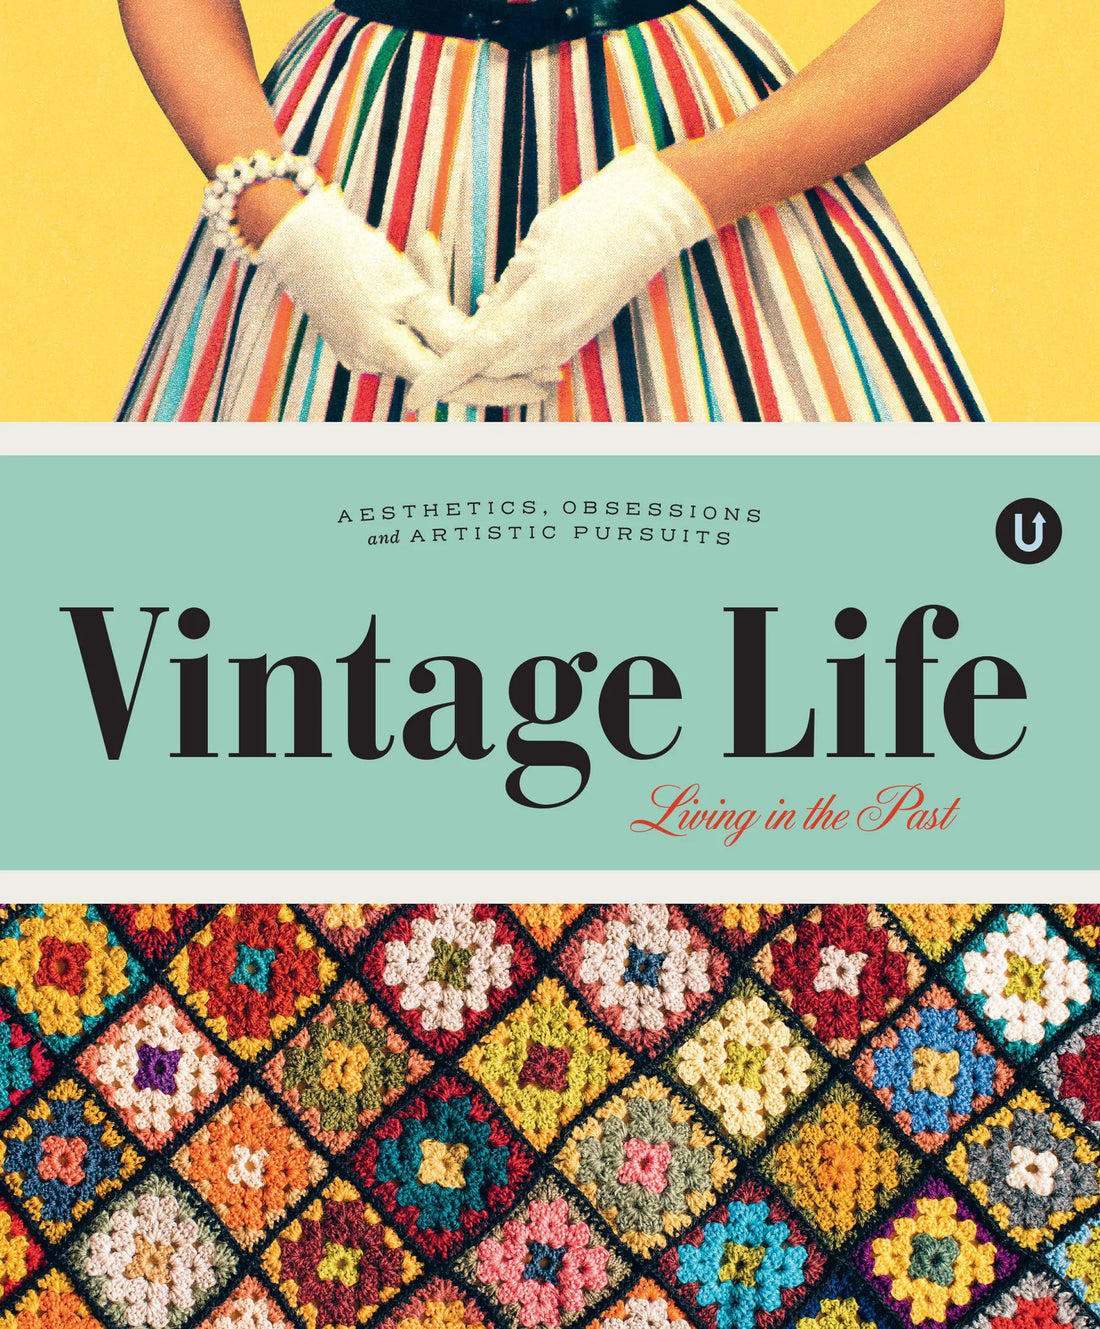 Vintage Life from Uppercase